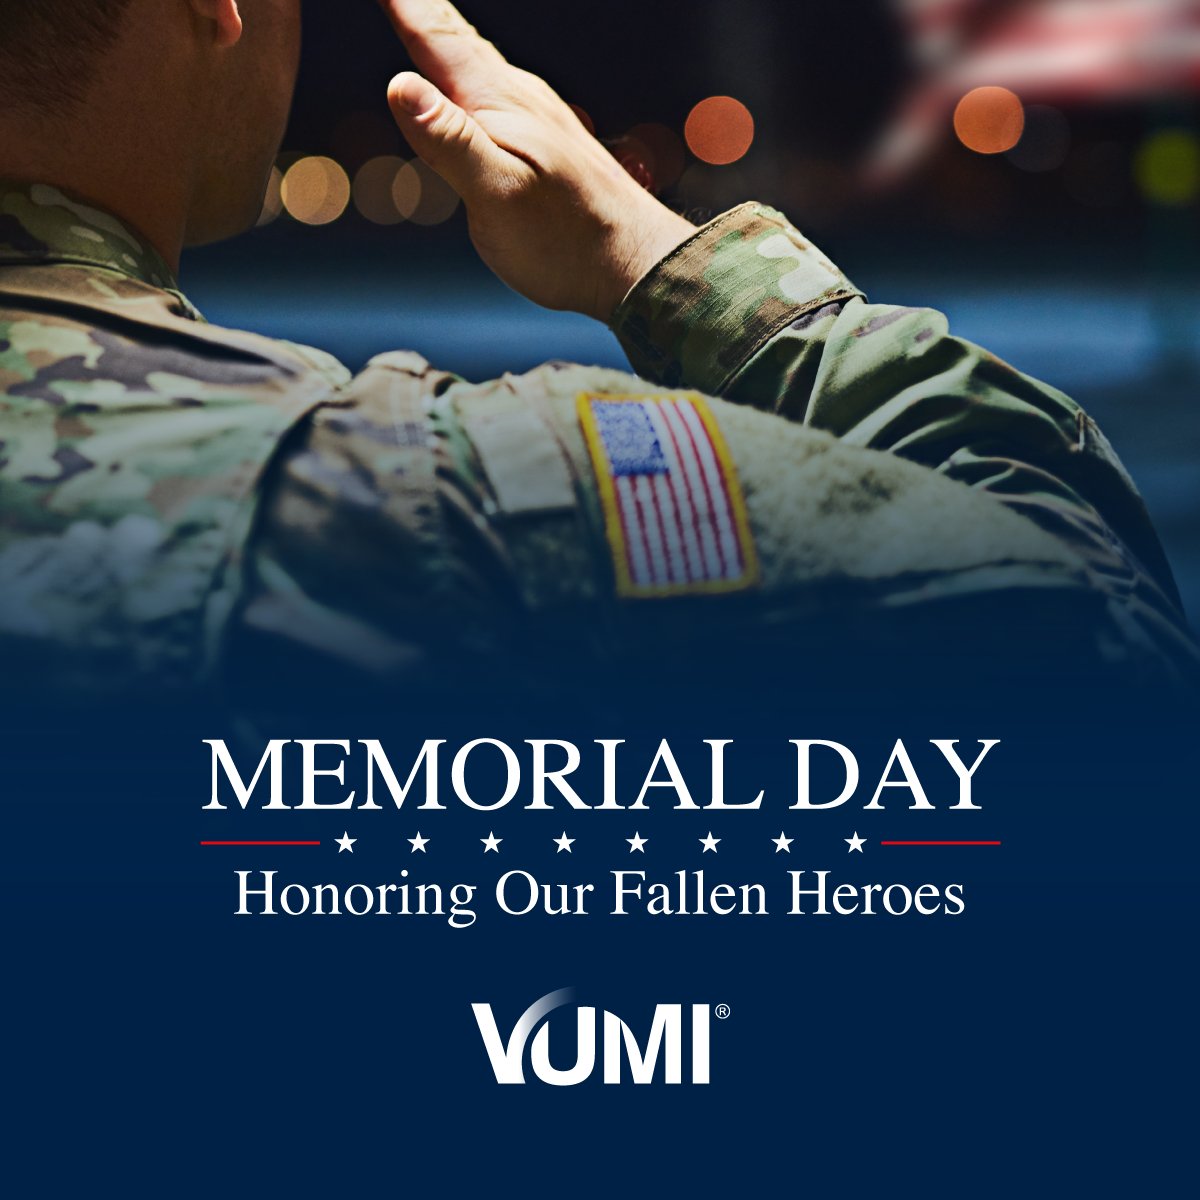 VUMI® salutes the brave men and women who have served. Happy Memorial Day!

#VUMIisWithYou #MemorialDay #TheSmartDecision #BeInformed #EmpowerYourself #HealthInsurance #GlobalCoverage #FinancialWellness #FinancialProtection #ComprehensiveMedicalCoverage #Awarenes